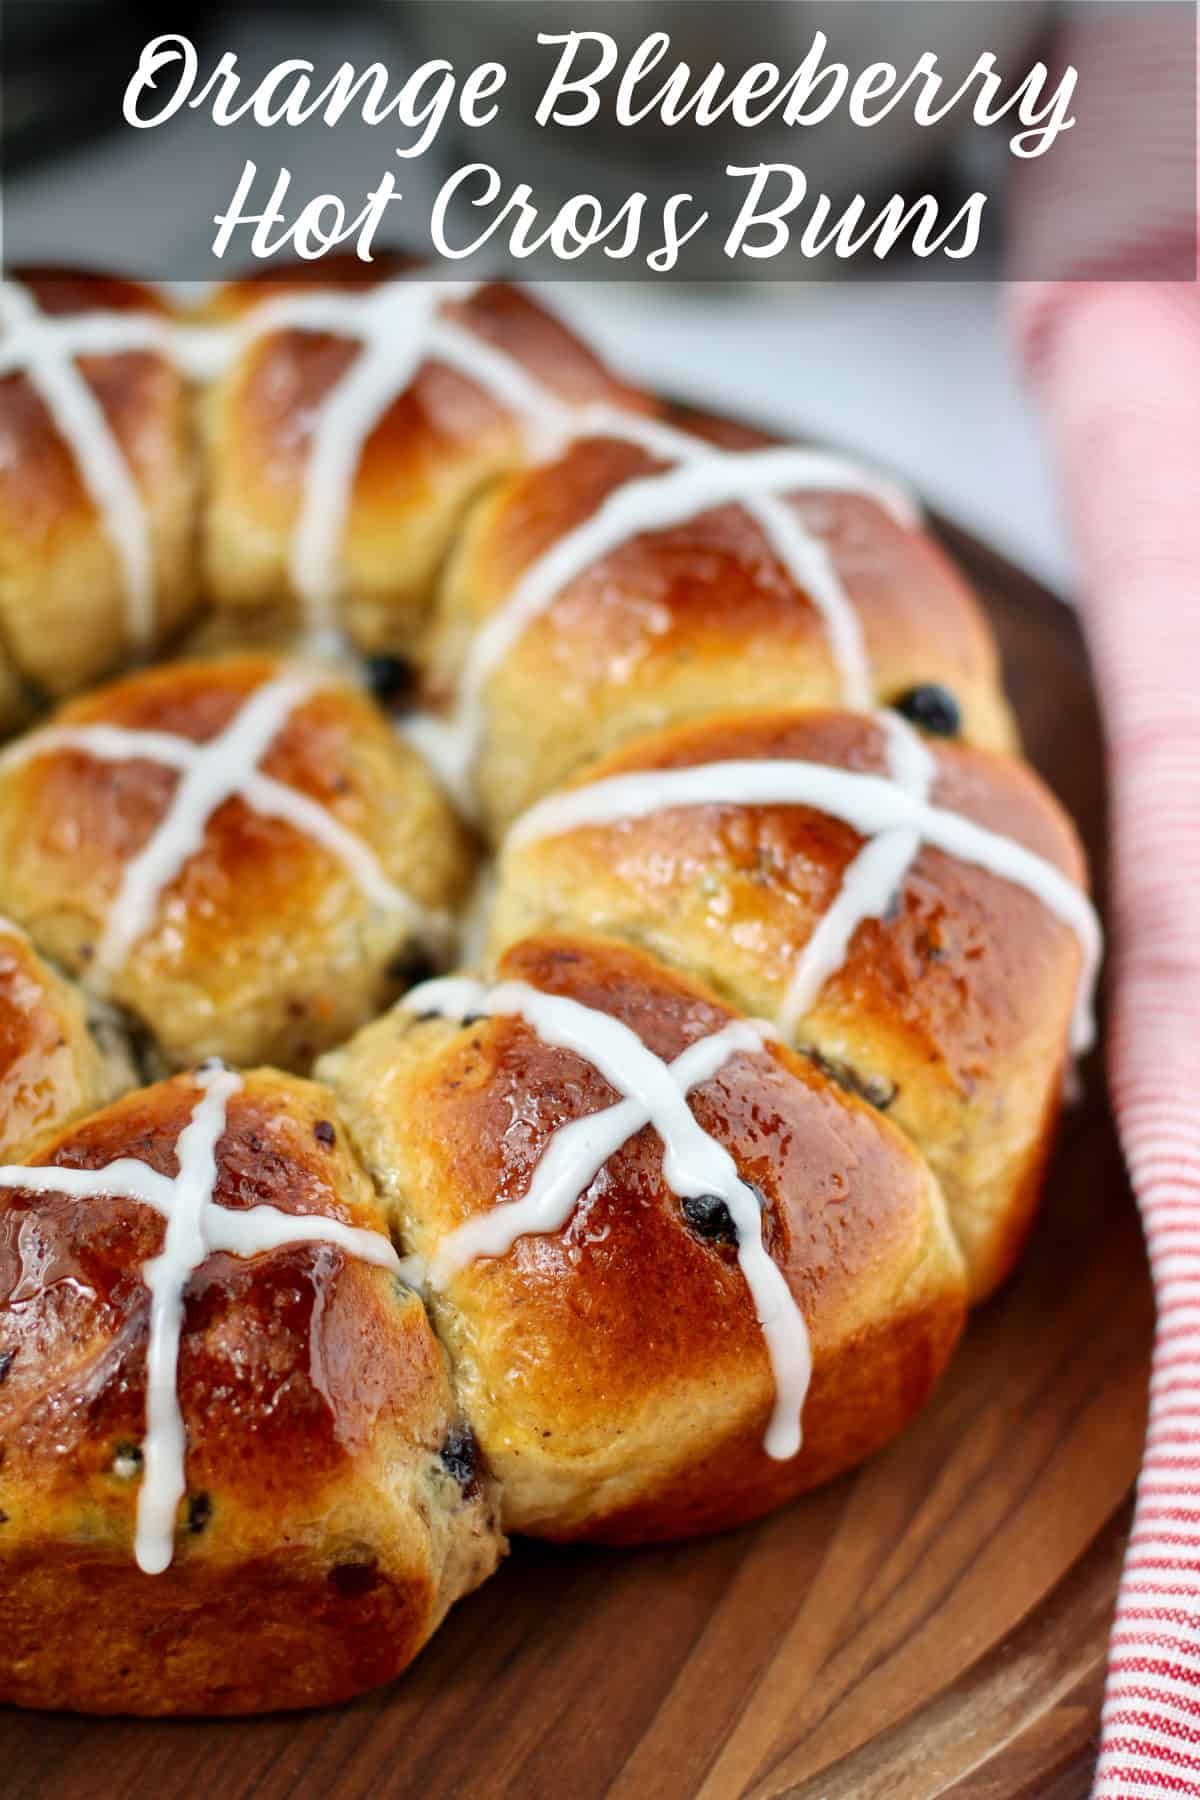 Orange Blueberry Hot Cross Buns with icing.